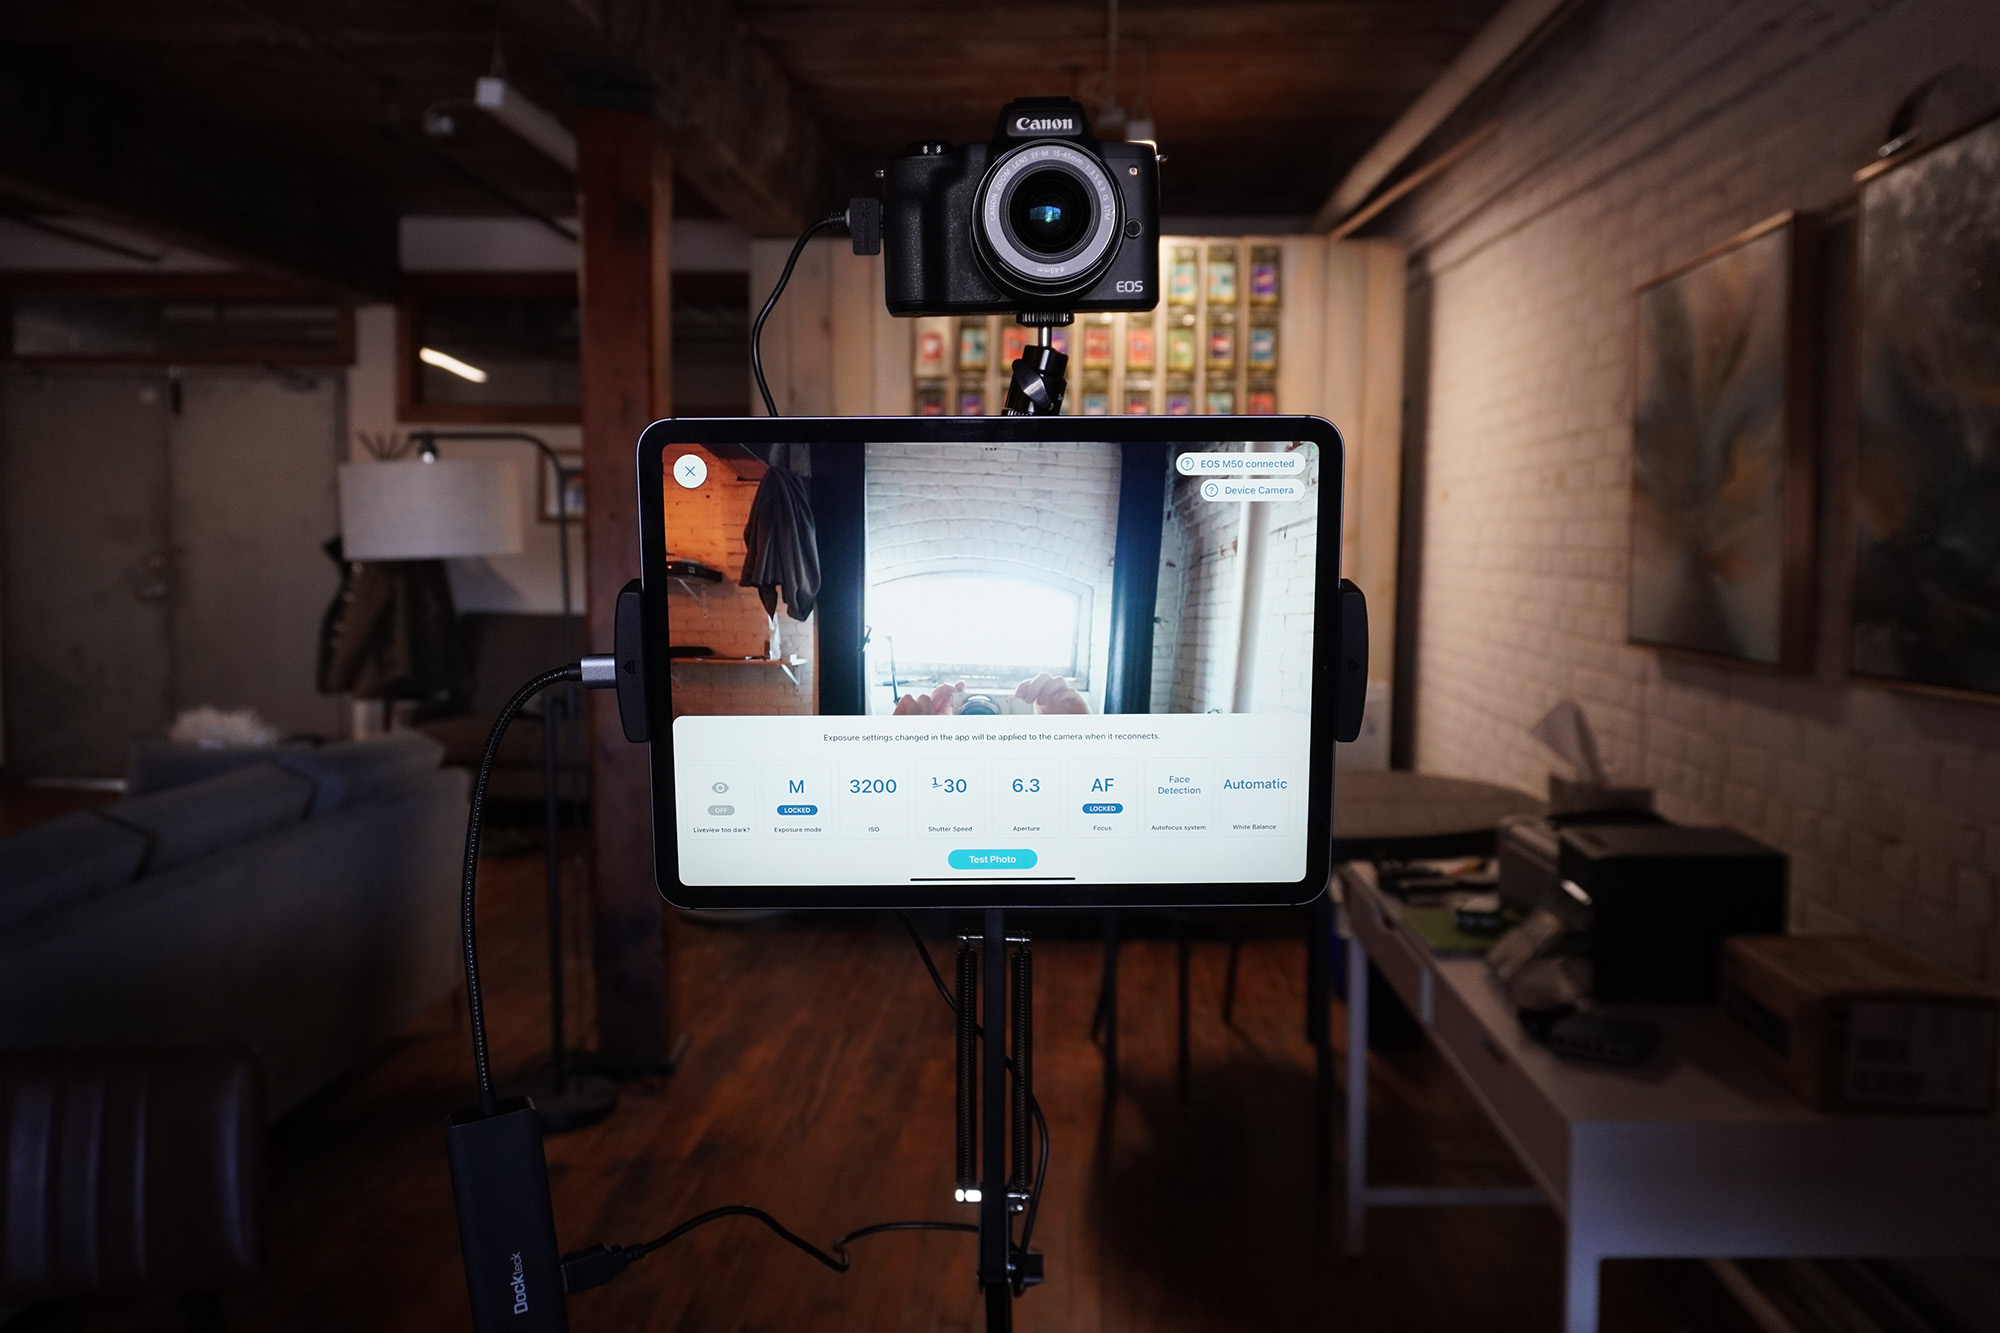 One of our test rigs with a Canon M50 connected to an iPad Pro with a USB-C hub from Dockteck, showing the camera settings page